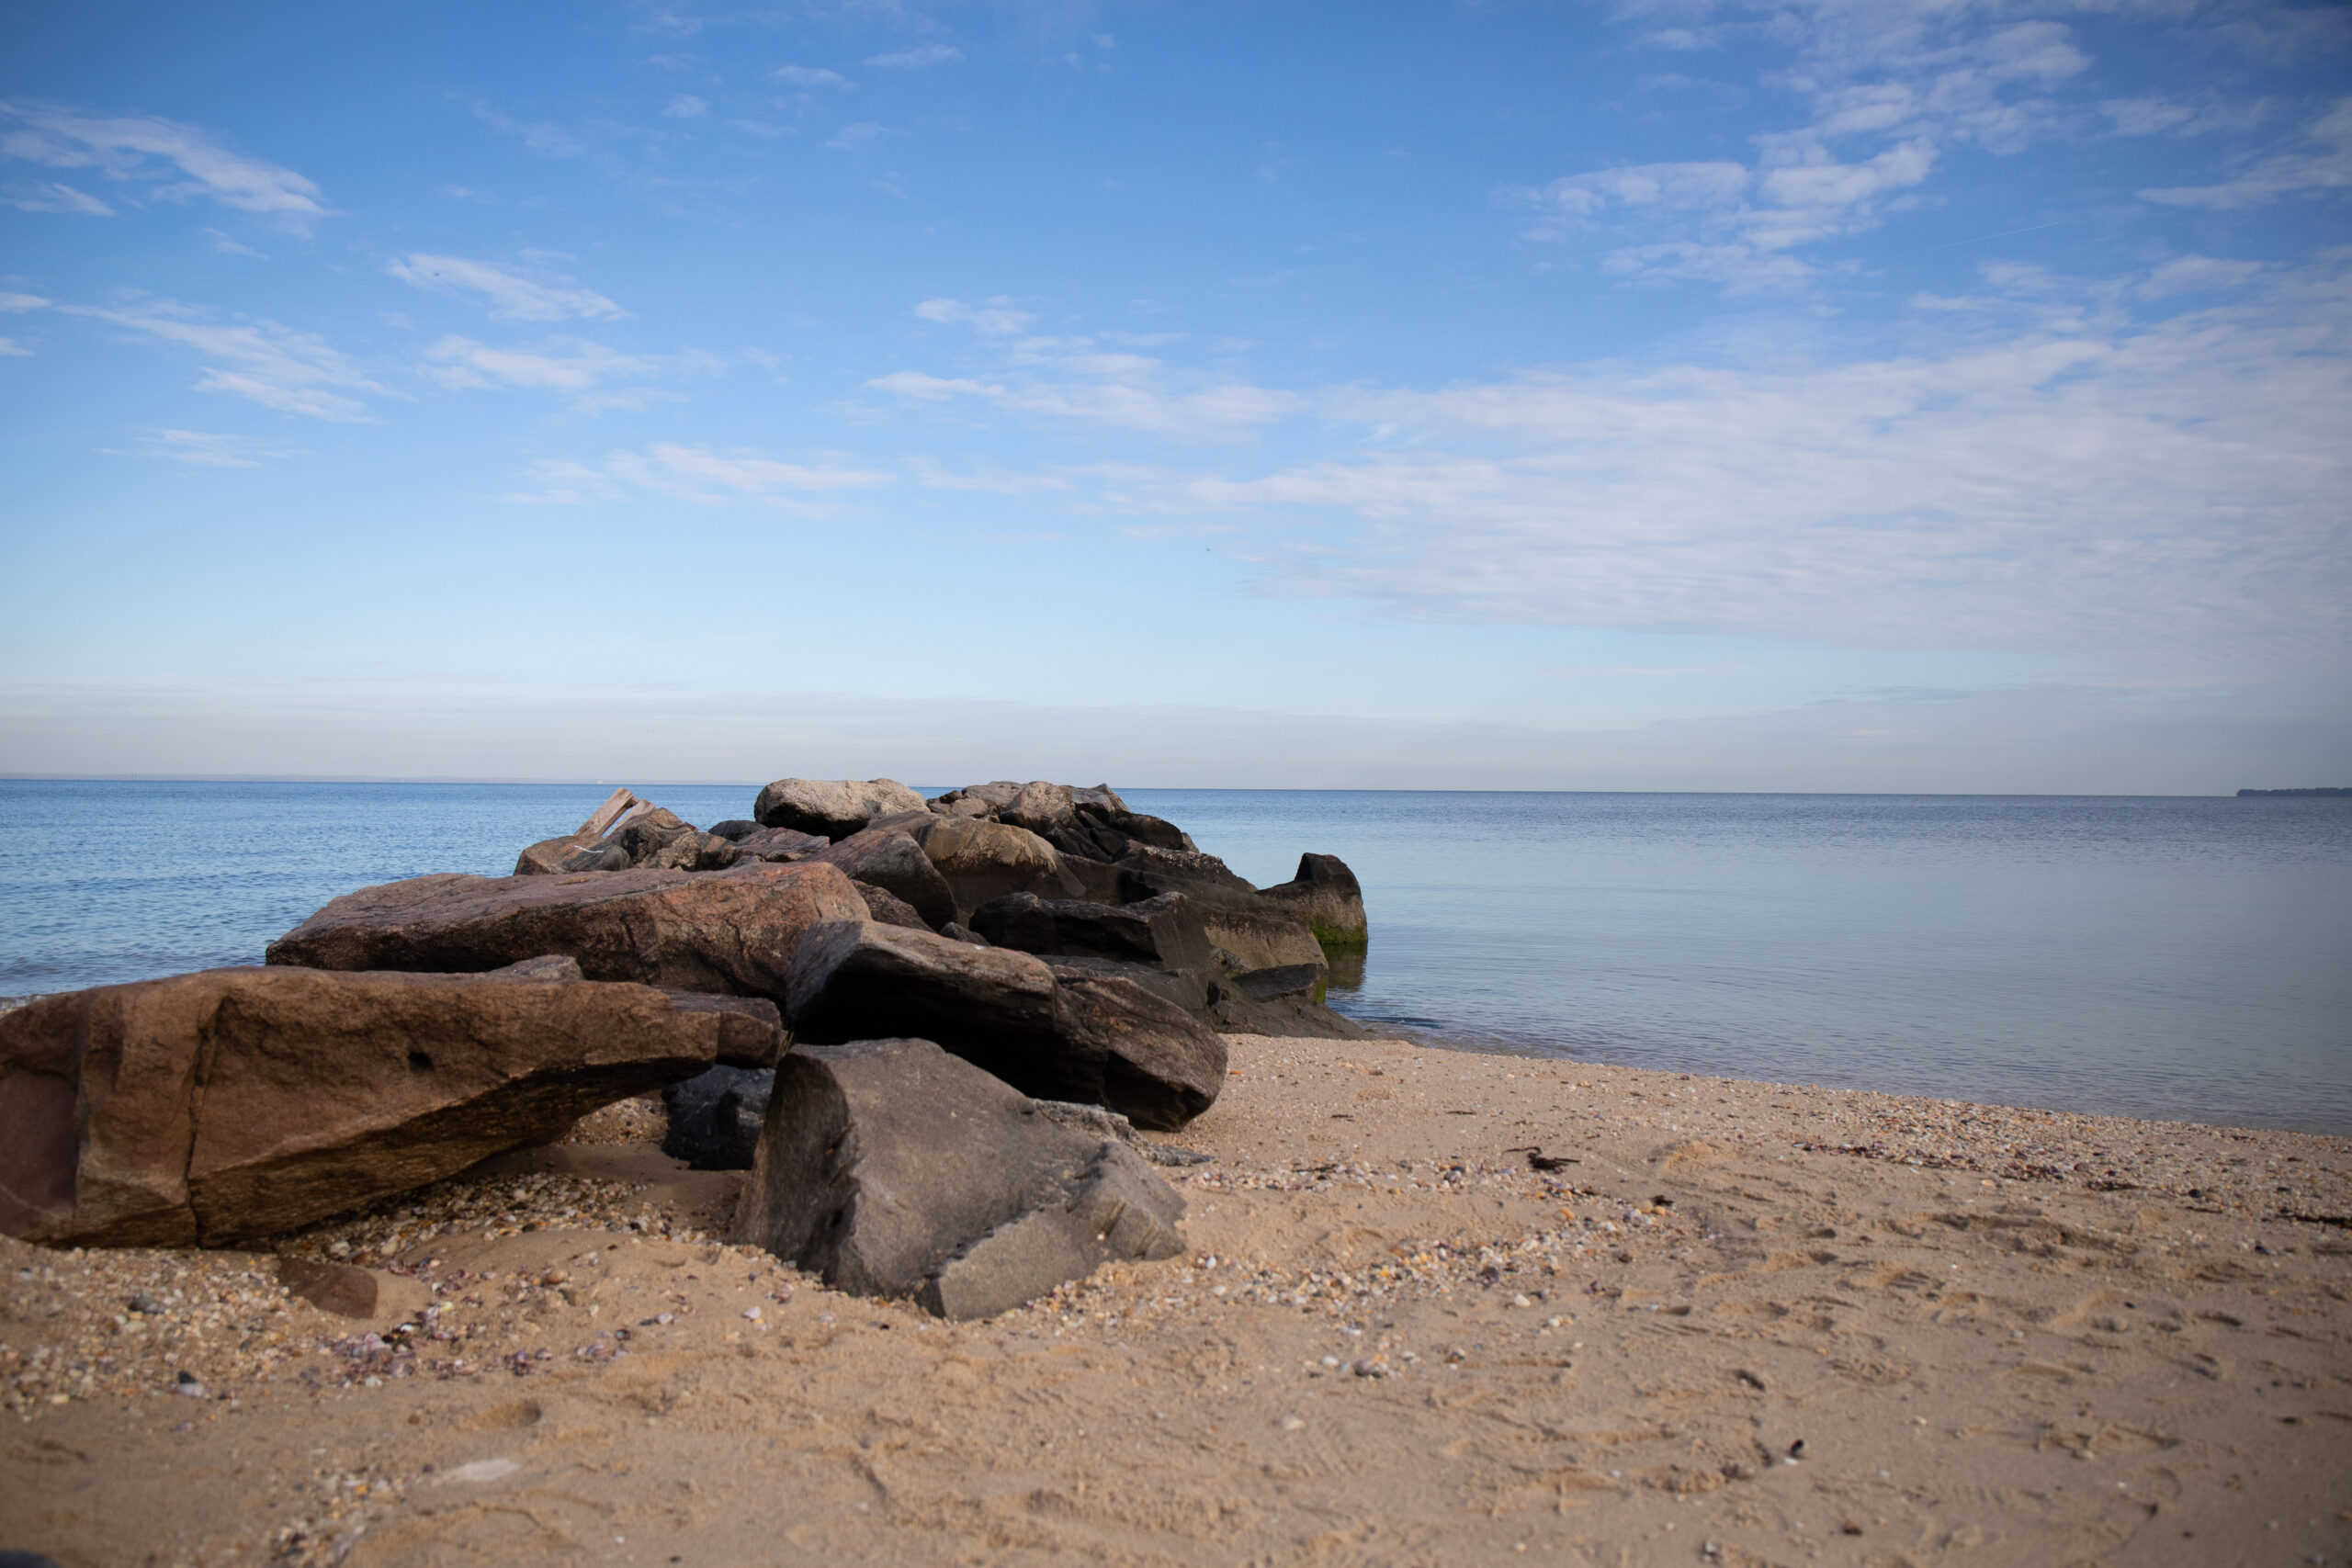 Calm shoreline with a rocky outcrop at Sunken Meadow Park, a potential outdoor wedding photography location.